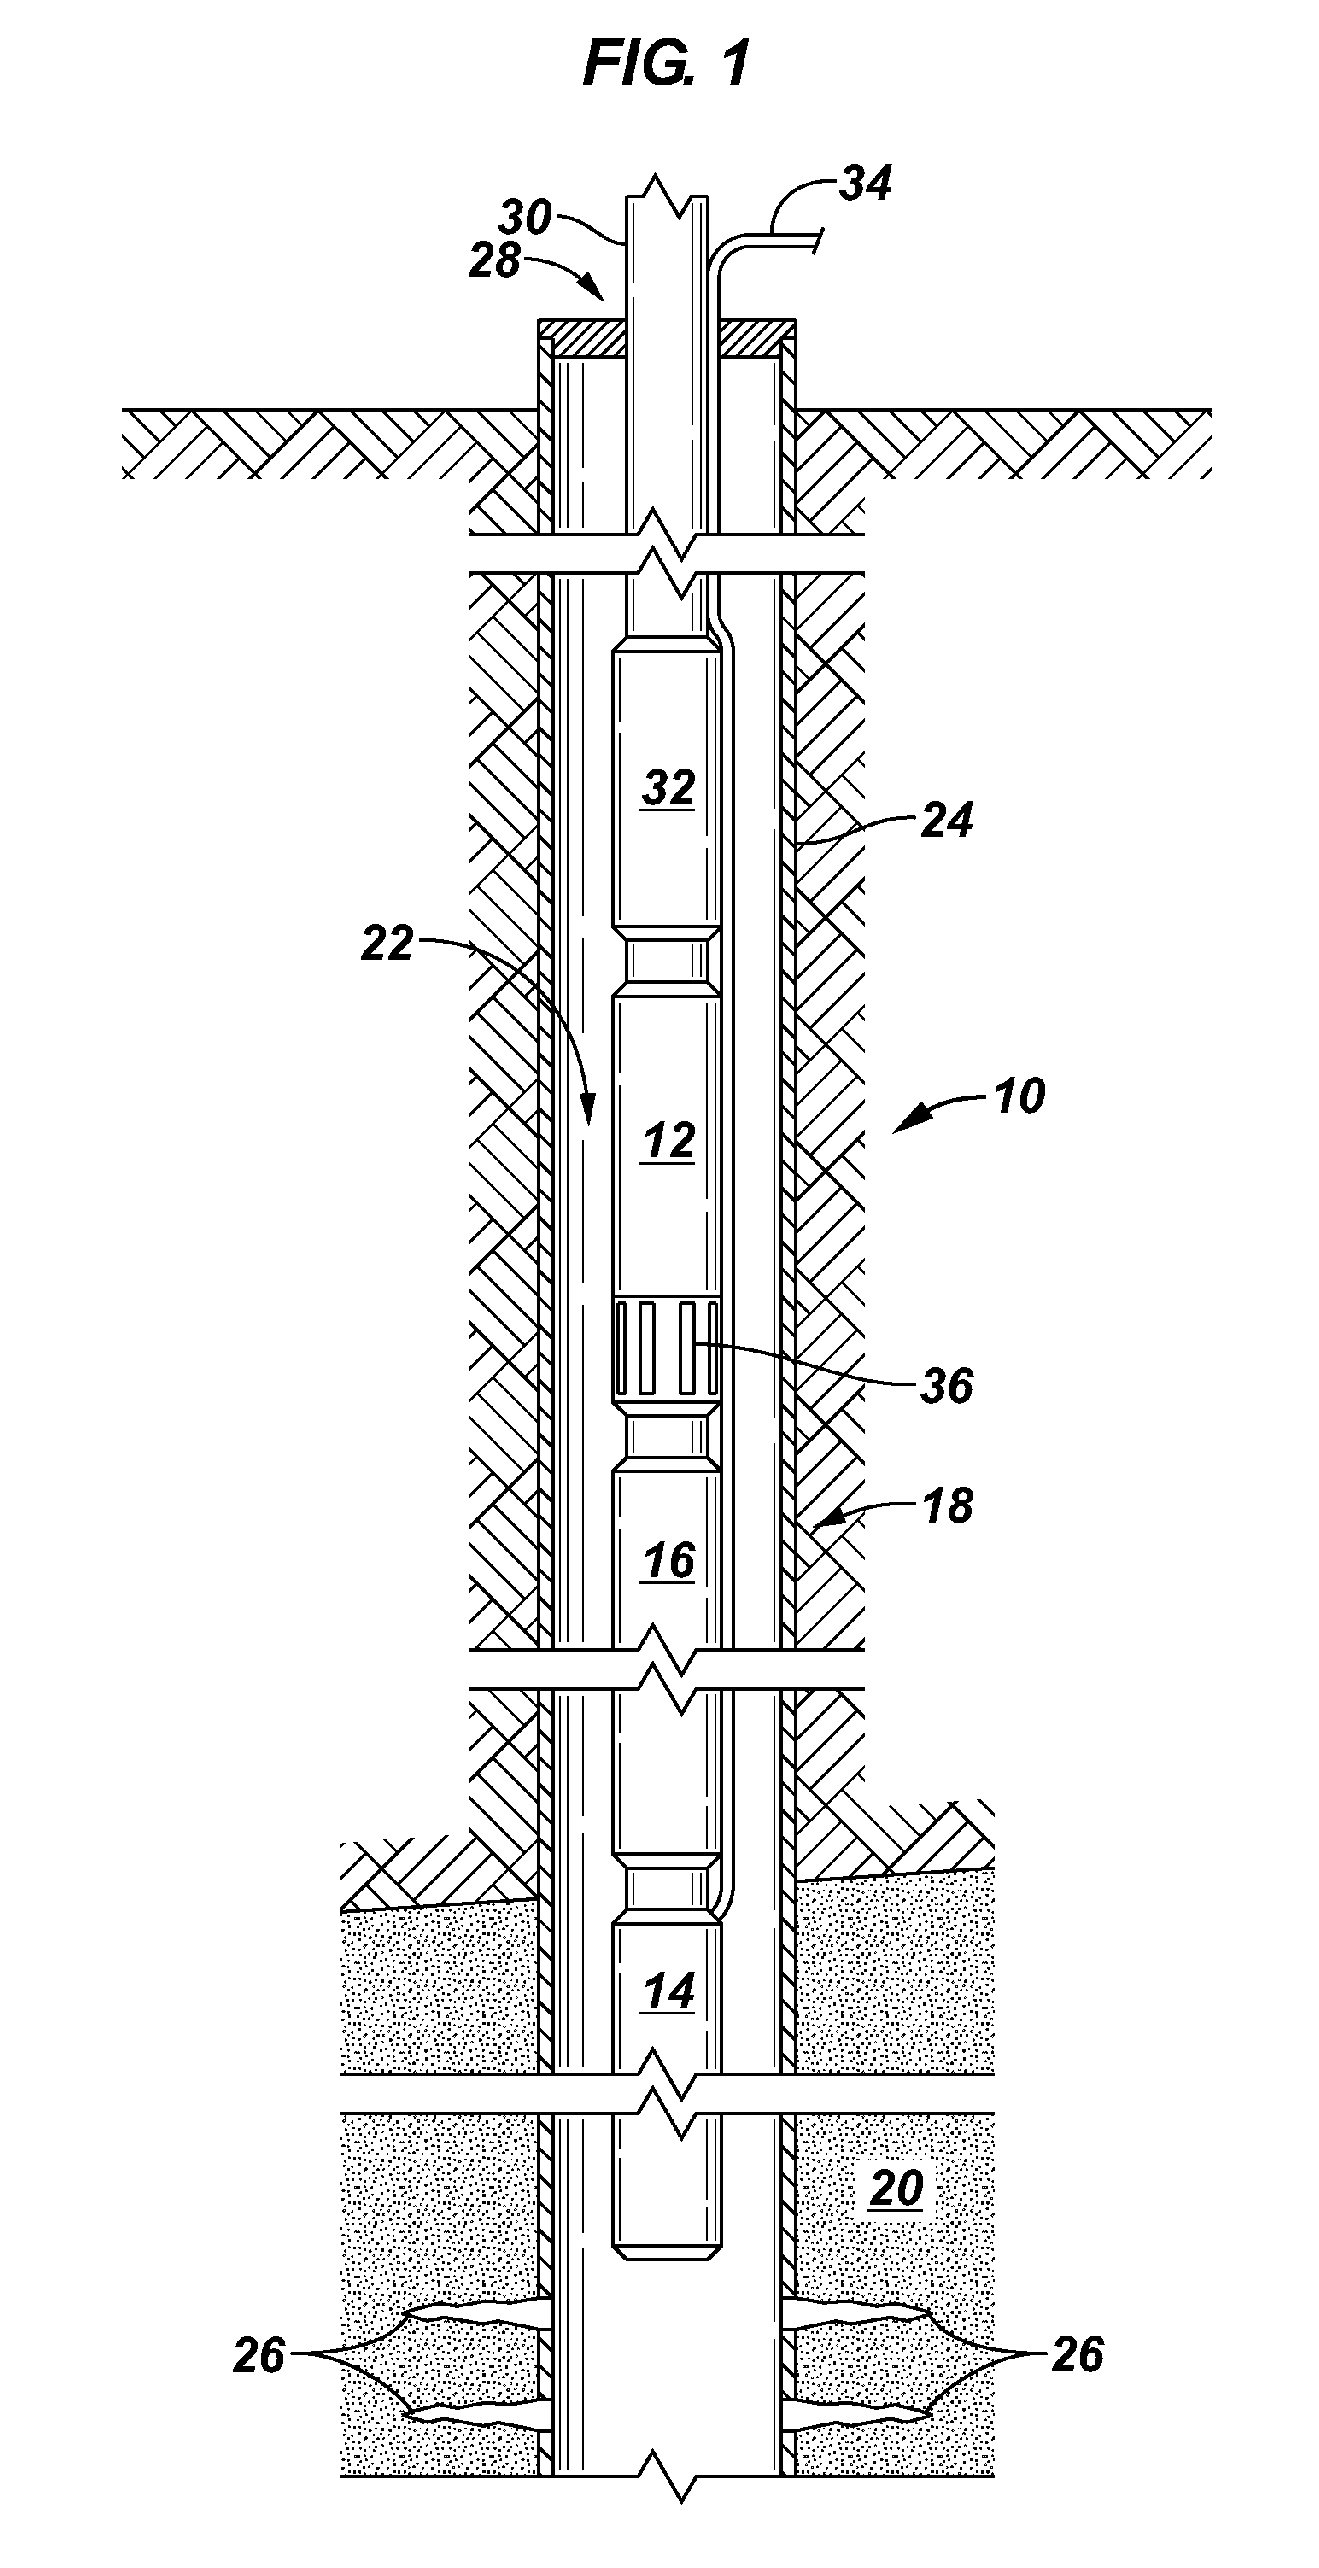 Apparatus, Pumping System Incorporating Same, and Methods of Protecting Pump Components